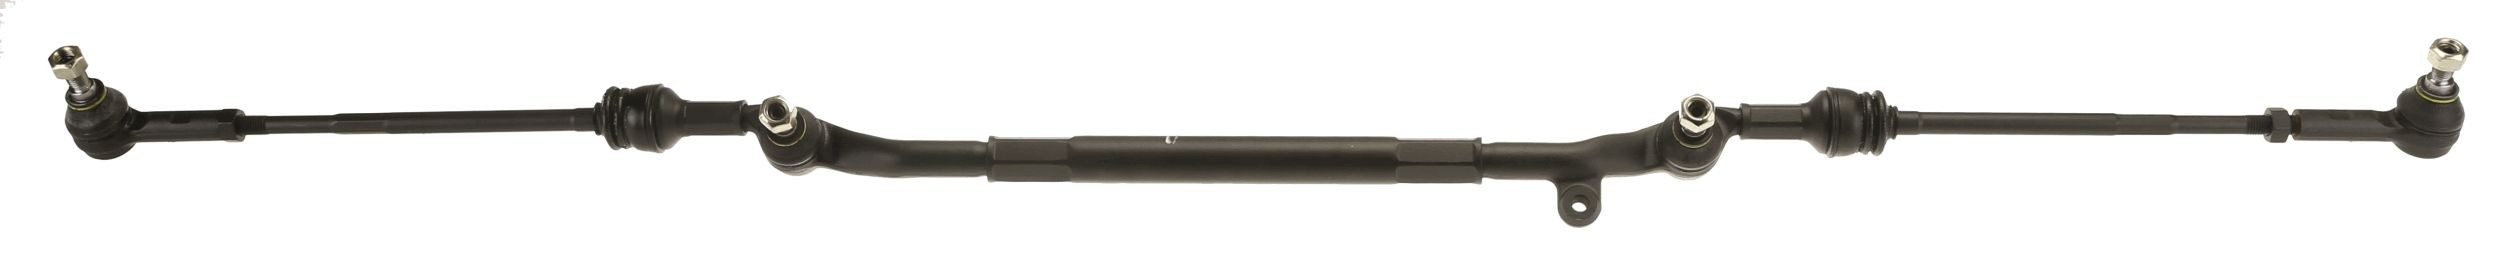 TRW JCY108 Centre rod assembly MERCEDES-BENZ C-Class 2010 price